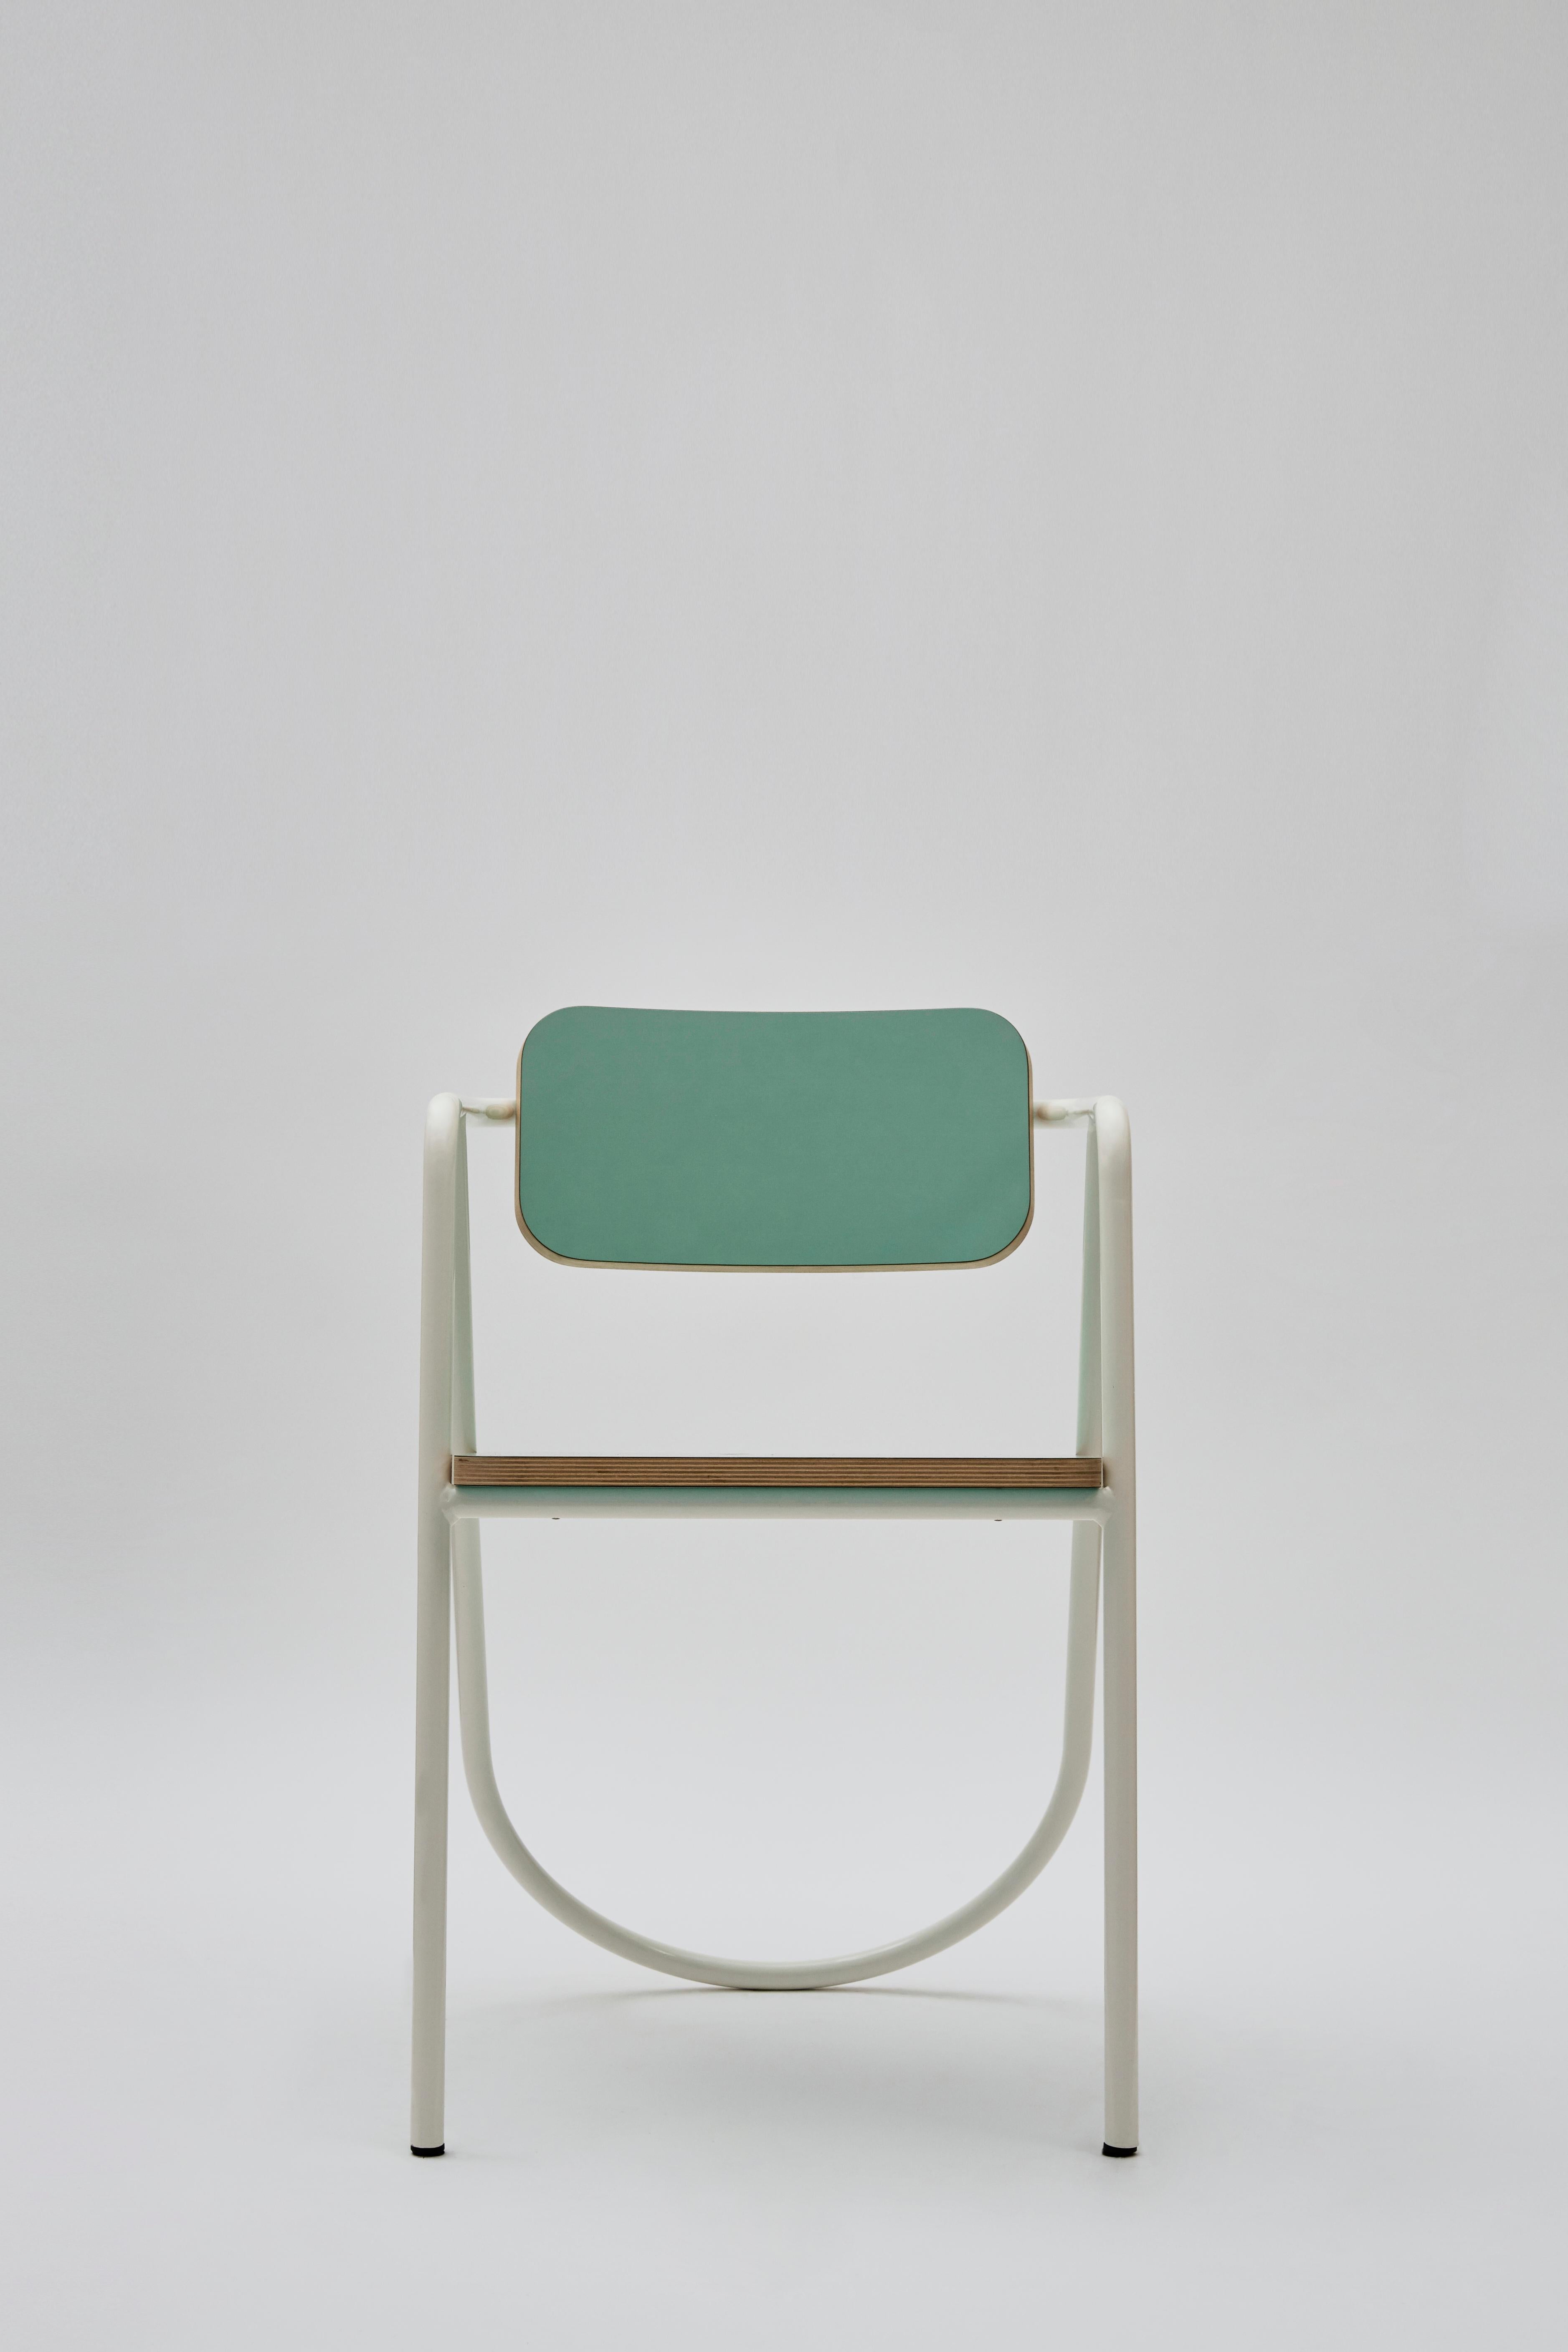 This elegant chair part of the La Misciù Collection boasts a graceful cylindrical steel structure finished in white, coupled to a seat and backrest marked by rounded corners and finished in bright teal. Available in multiple color options to be